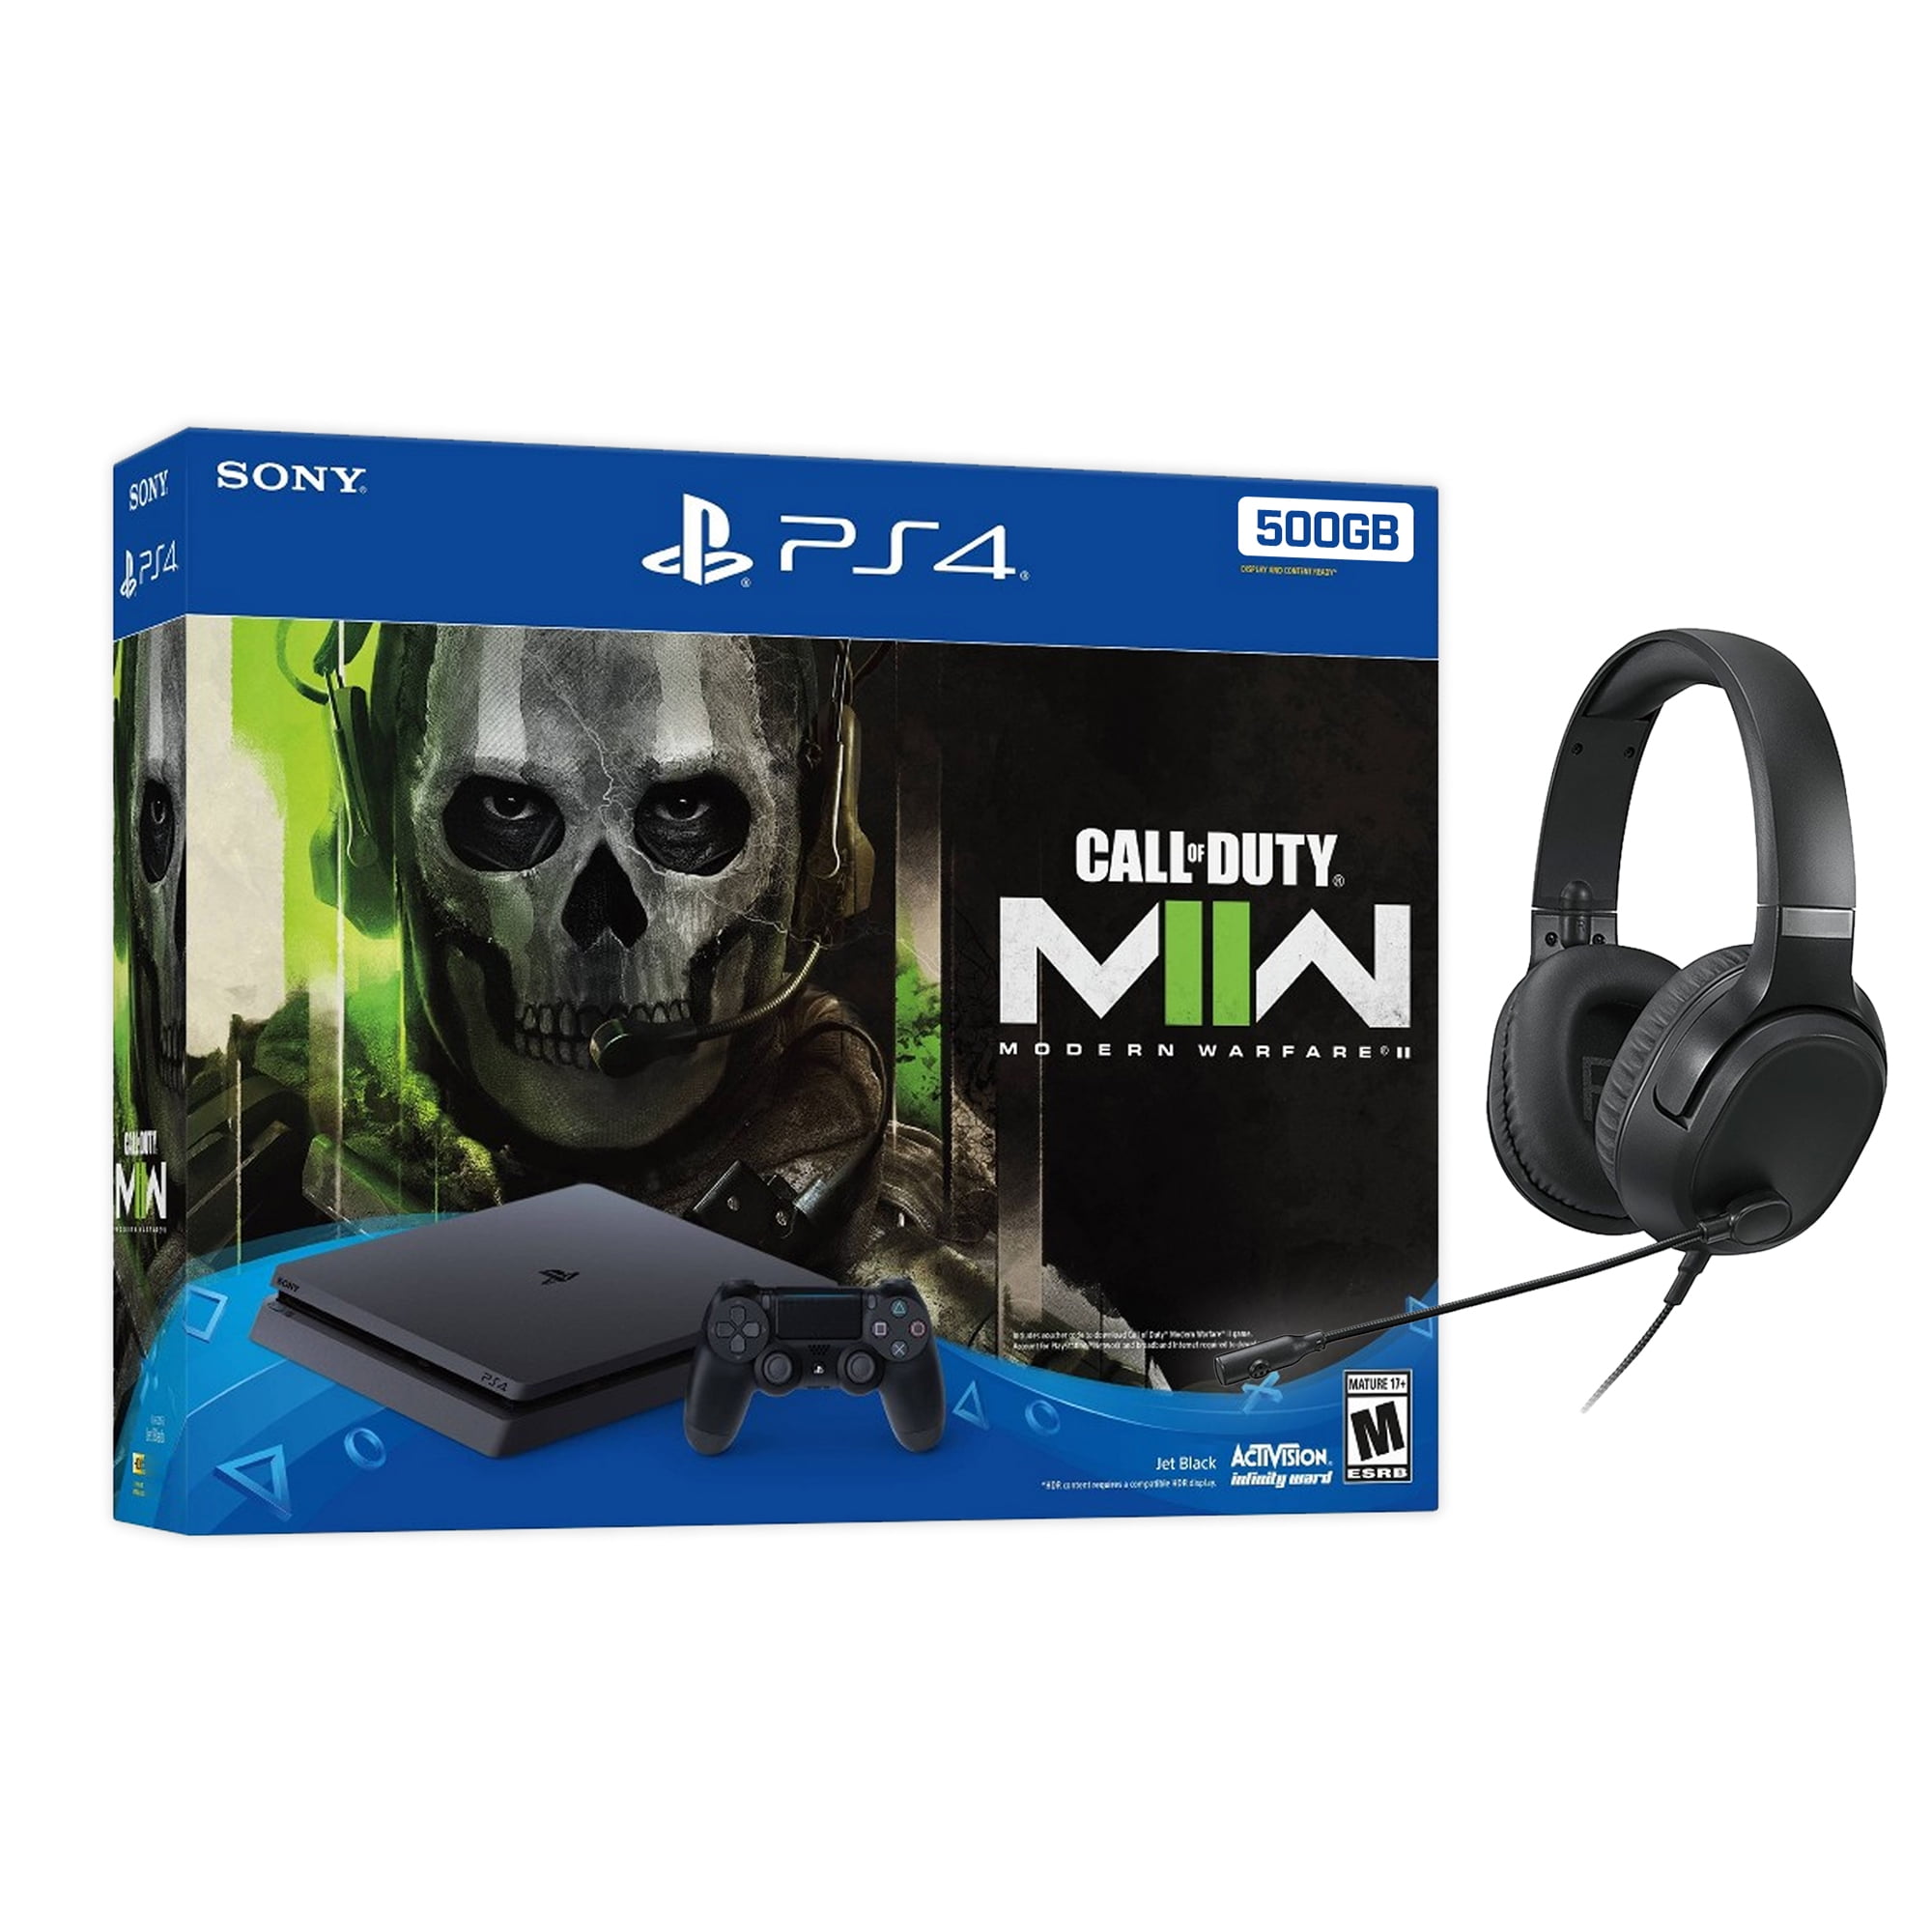 Sony PlayStation 4 Slim Call of Duty Modern Warfare II Bundle GB PS4  Gaming Console, Jet Black, with Mytrix Chat Headset